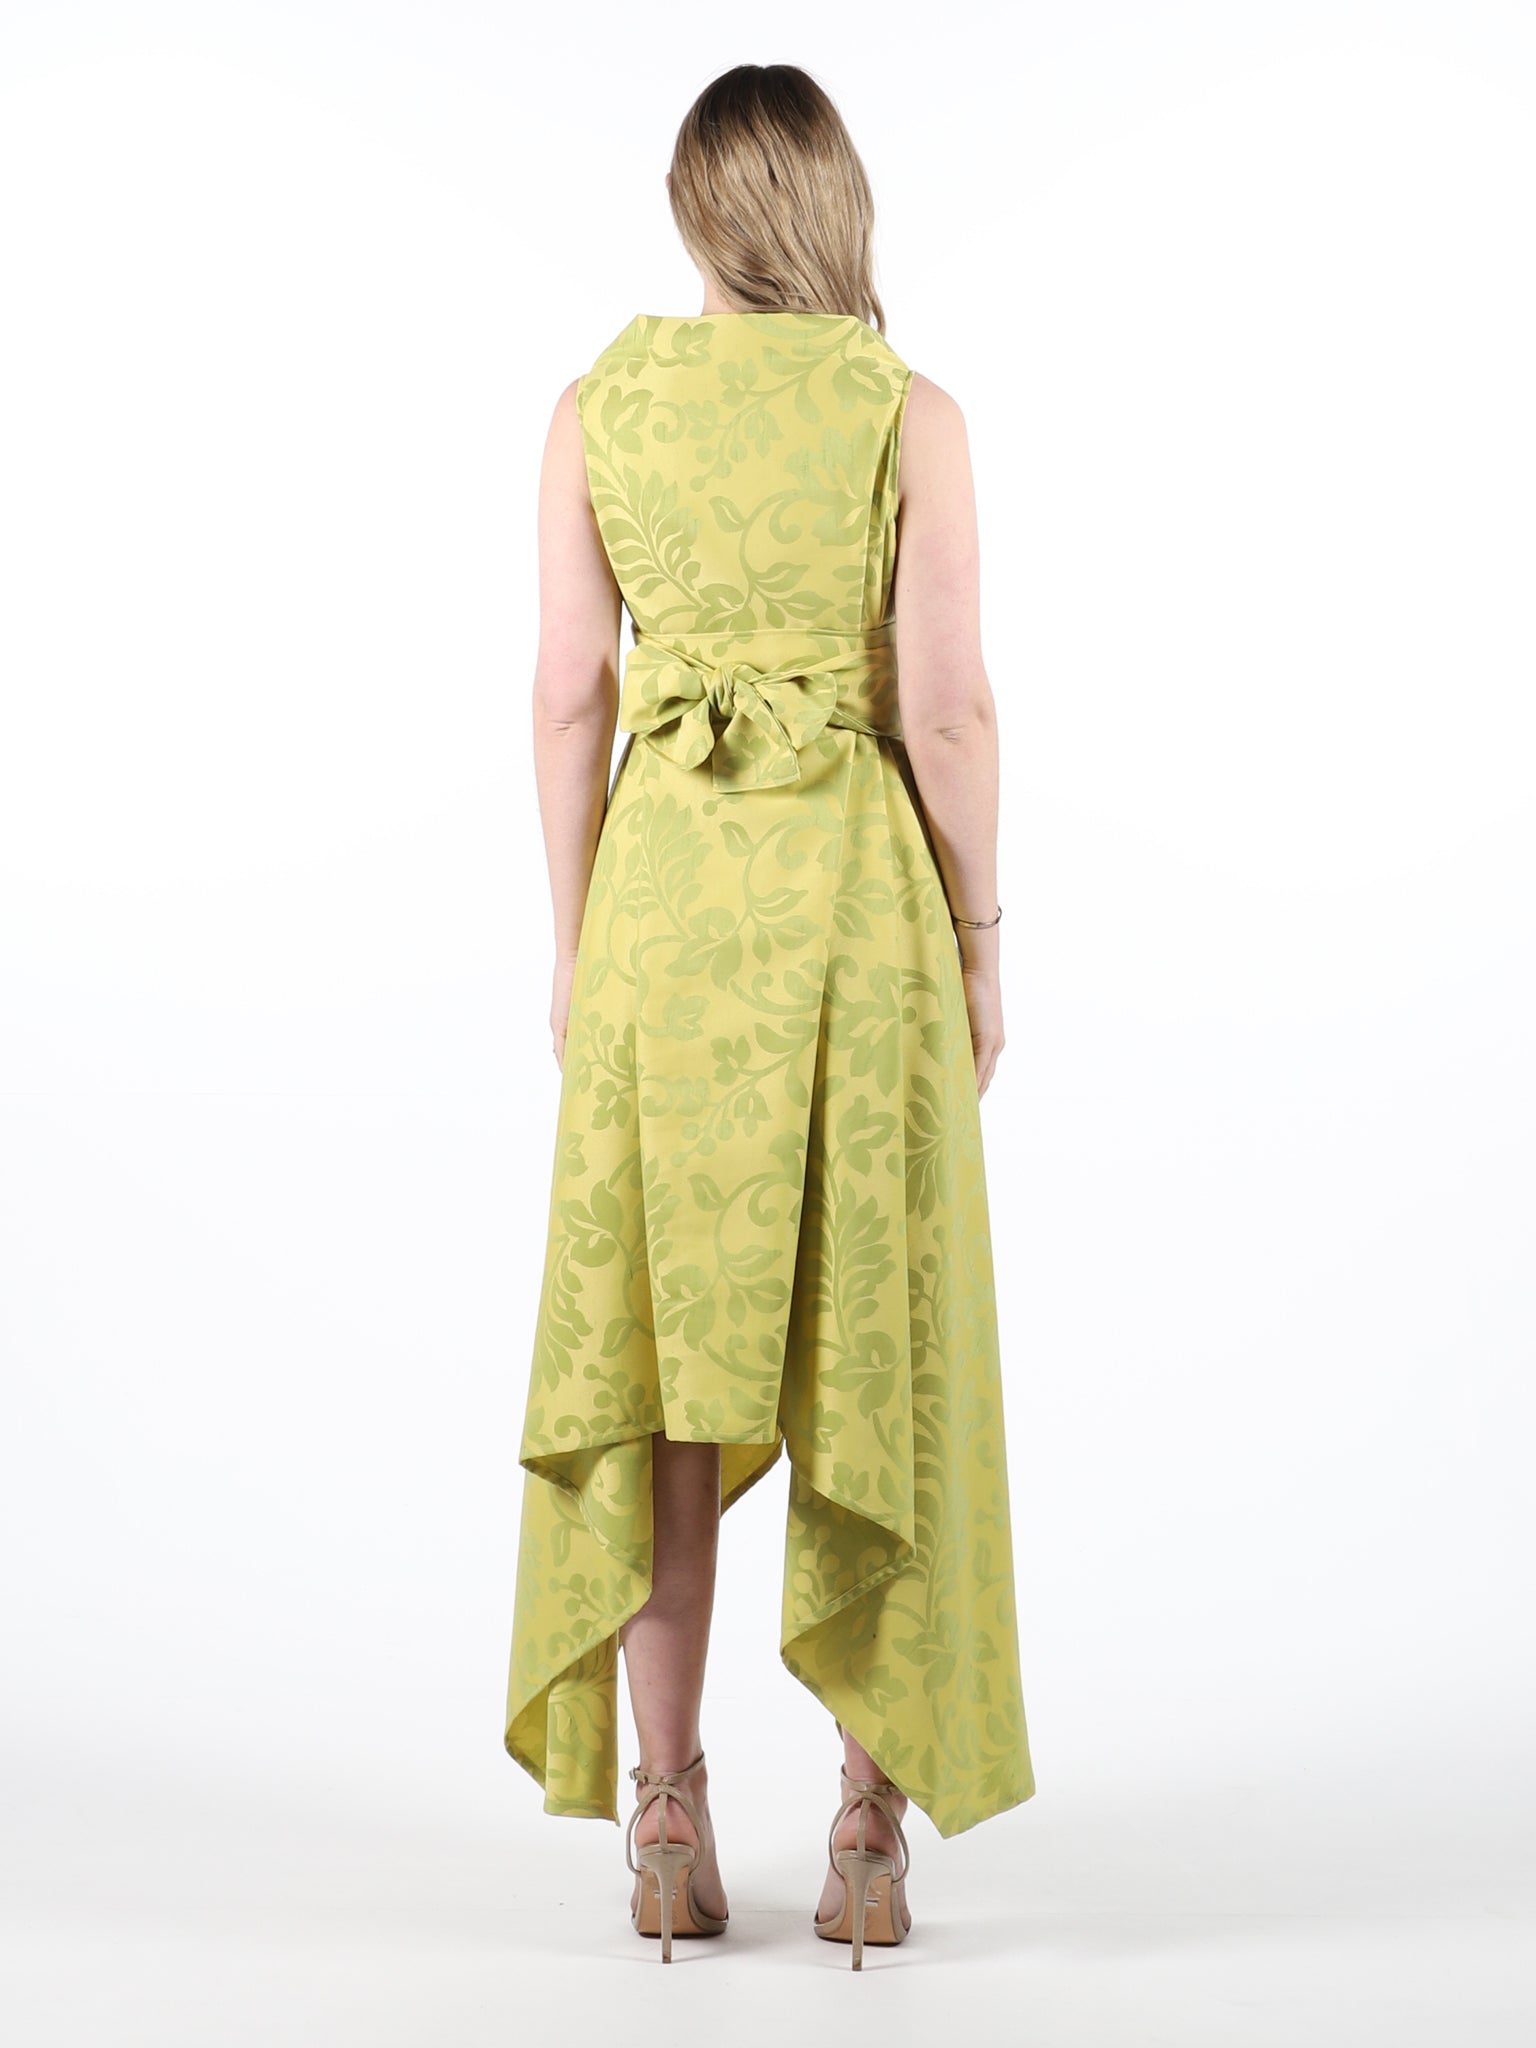 Yellow and Lime Green Darcy Dress